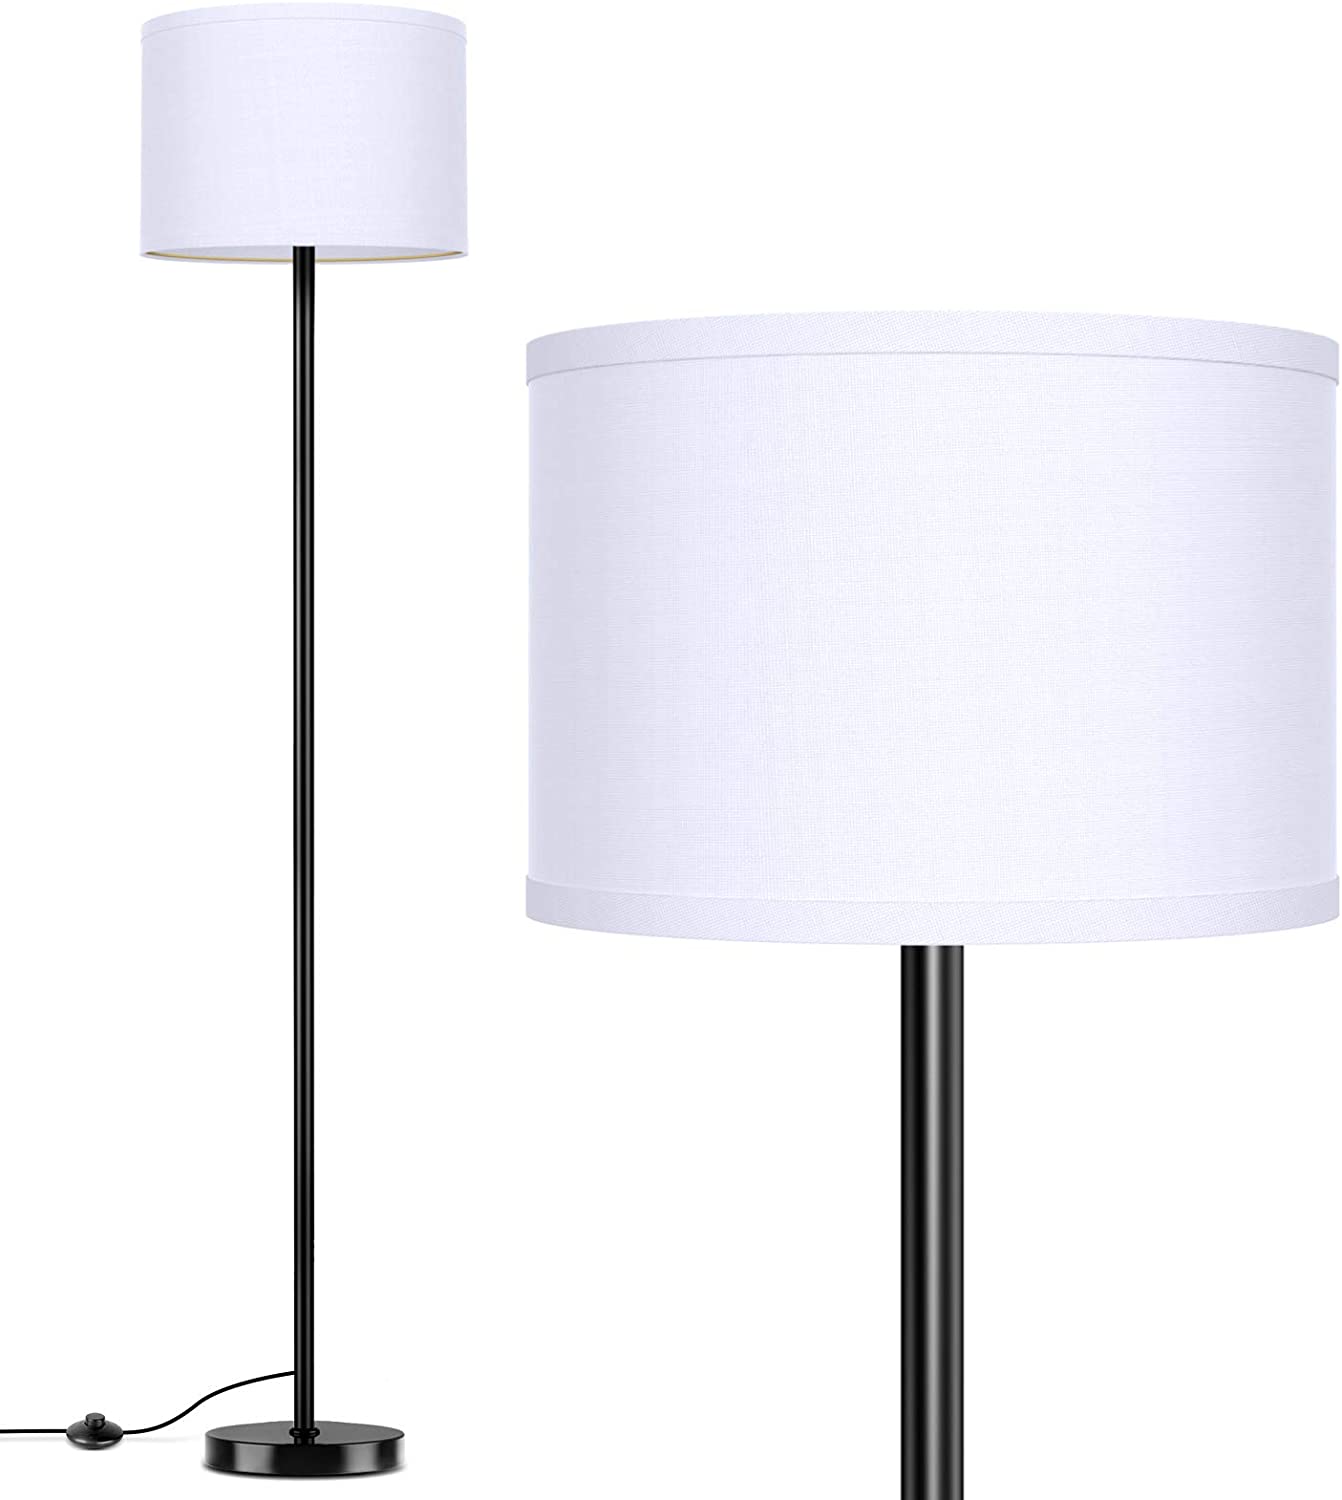 LED Floor Lamp Simple Design, Modern Standing Lamp with Shade,Tall Lamp for Living Room Bedroom Office Study Room, Black Pole Lights with Foot Switch, White Stand Up Lamp Fabric, E26 Base